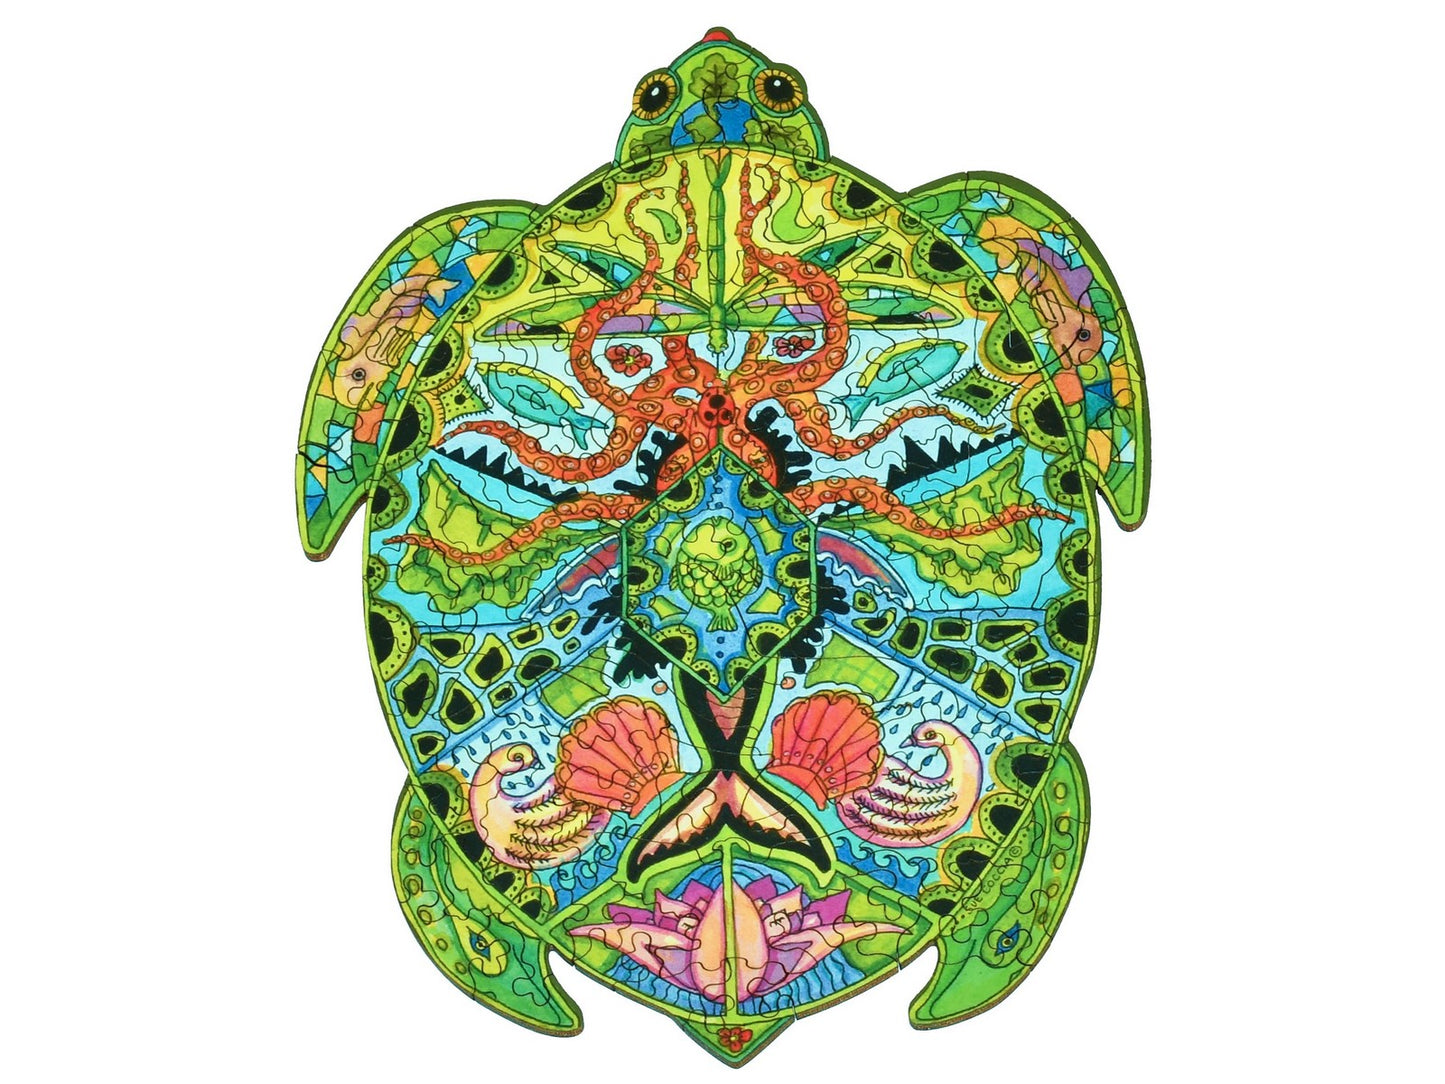 The front of the puzzle, Sea Turtle round, which shows various plants and sea animals in the shape of a sea turtle.